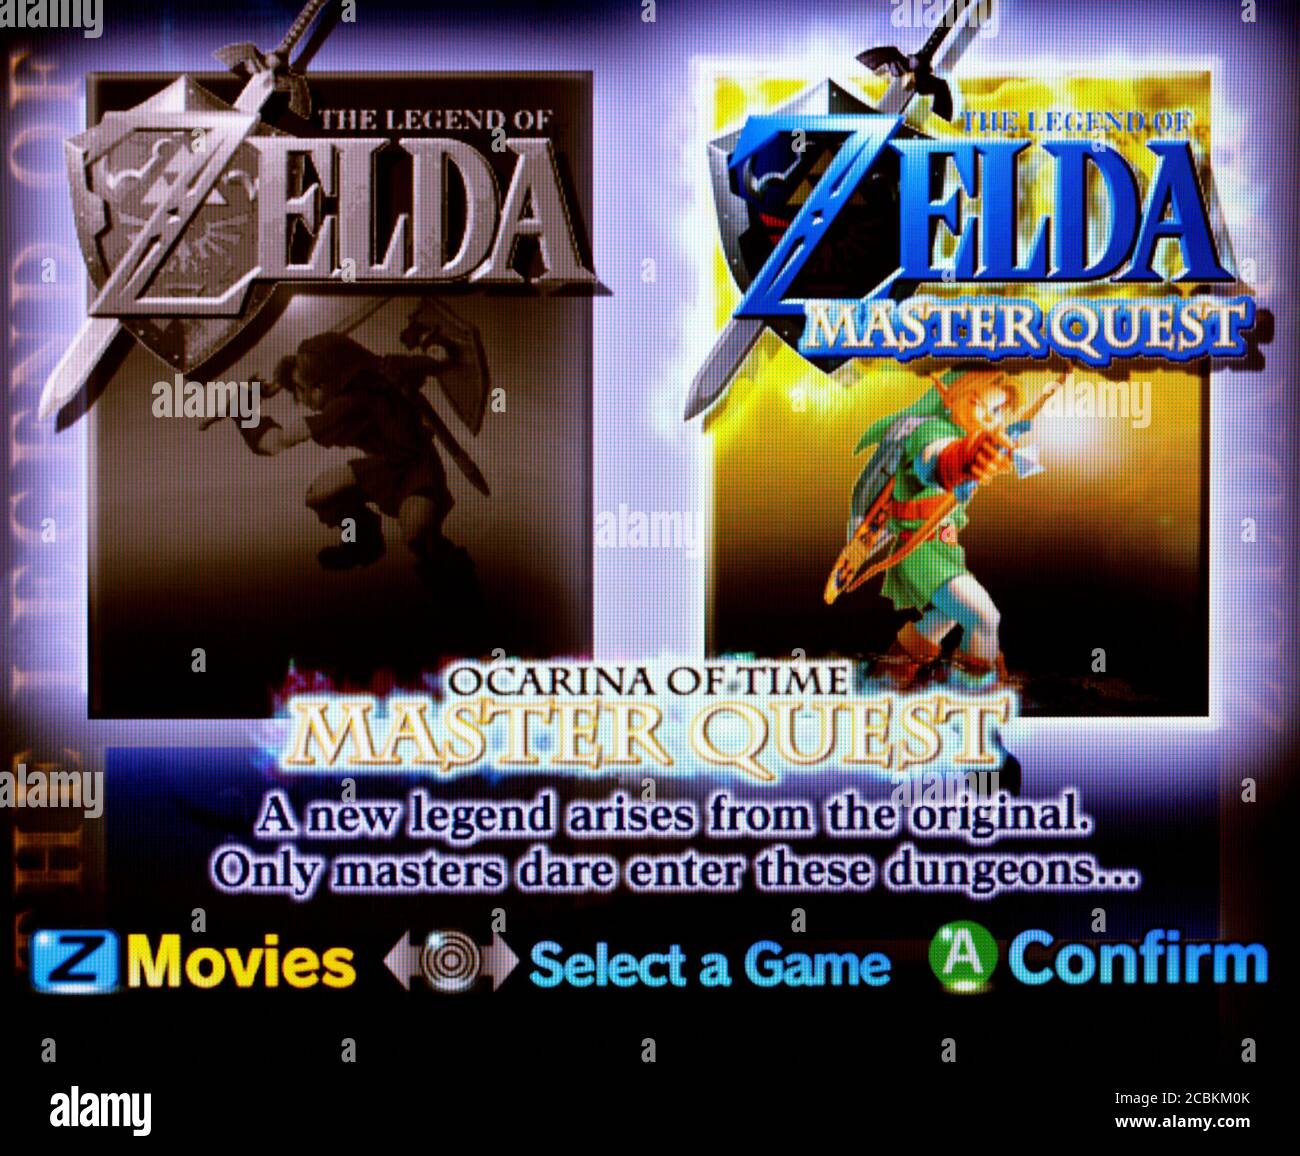 The Legend of Zelda: Ocarina of Time / Master Quest for GameCube